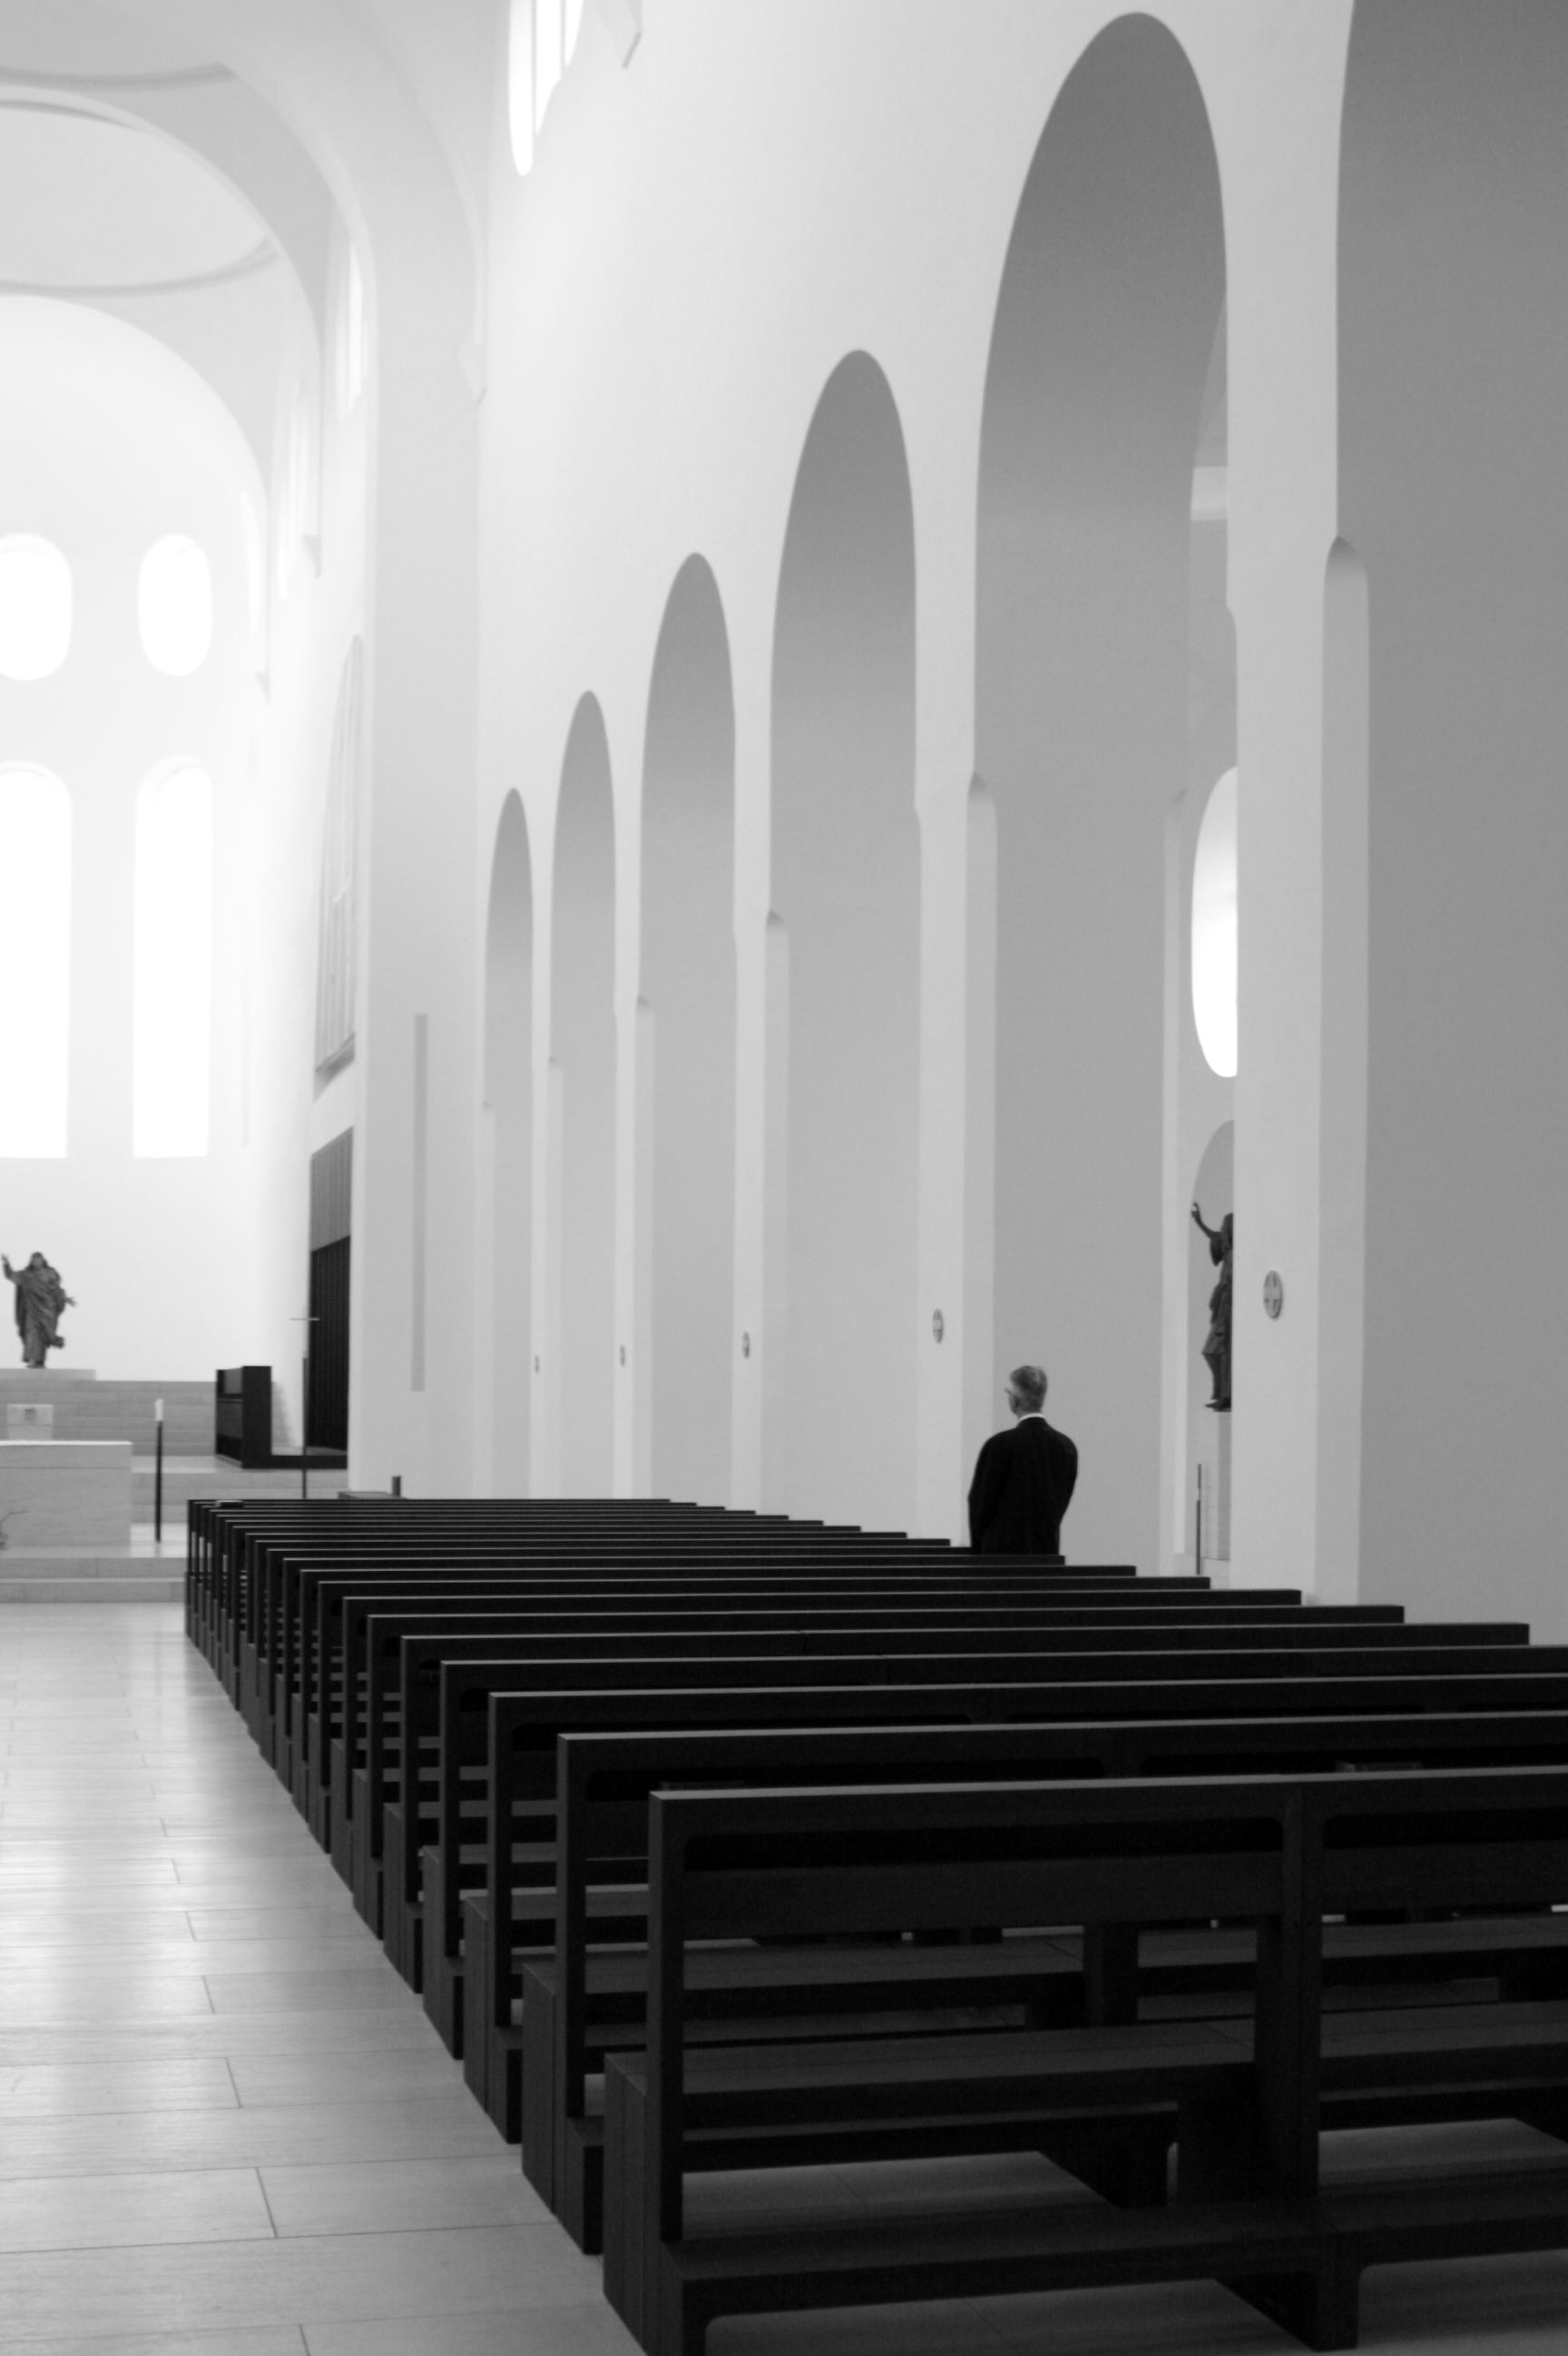 A solitary figure stands in a church with several tall archways